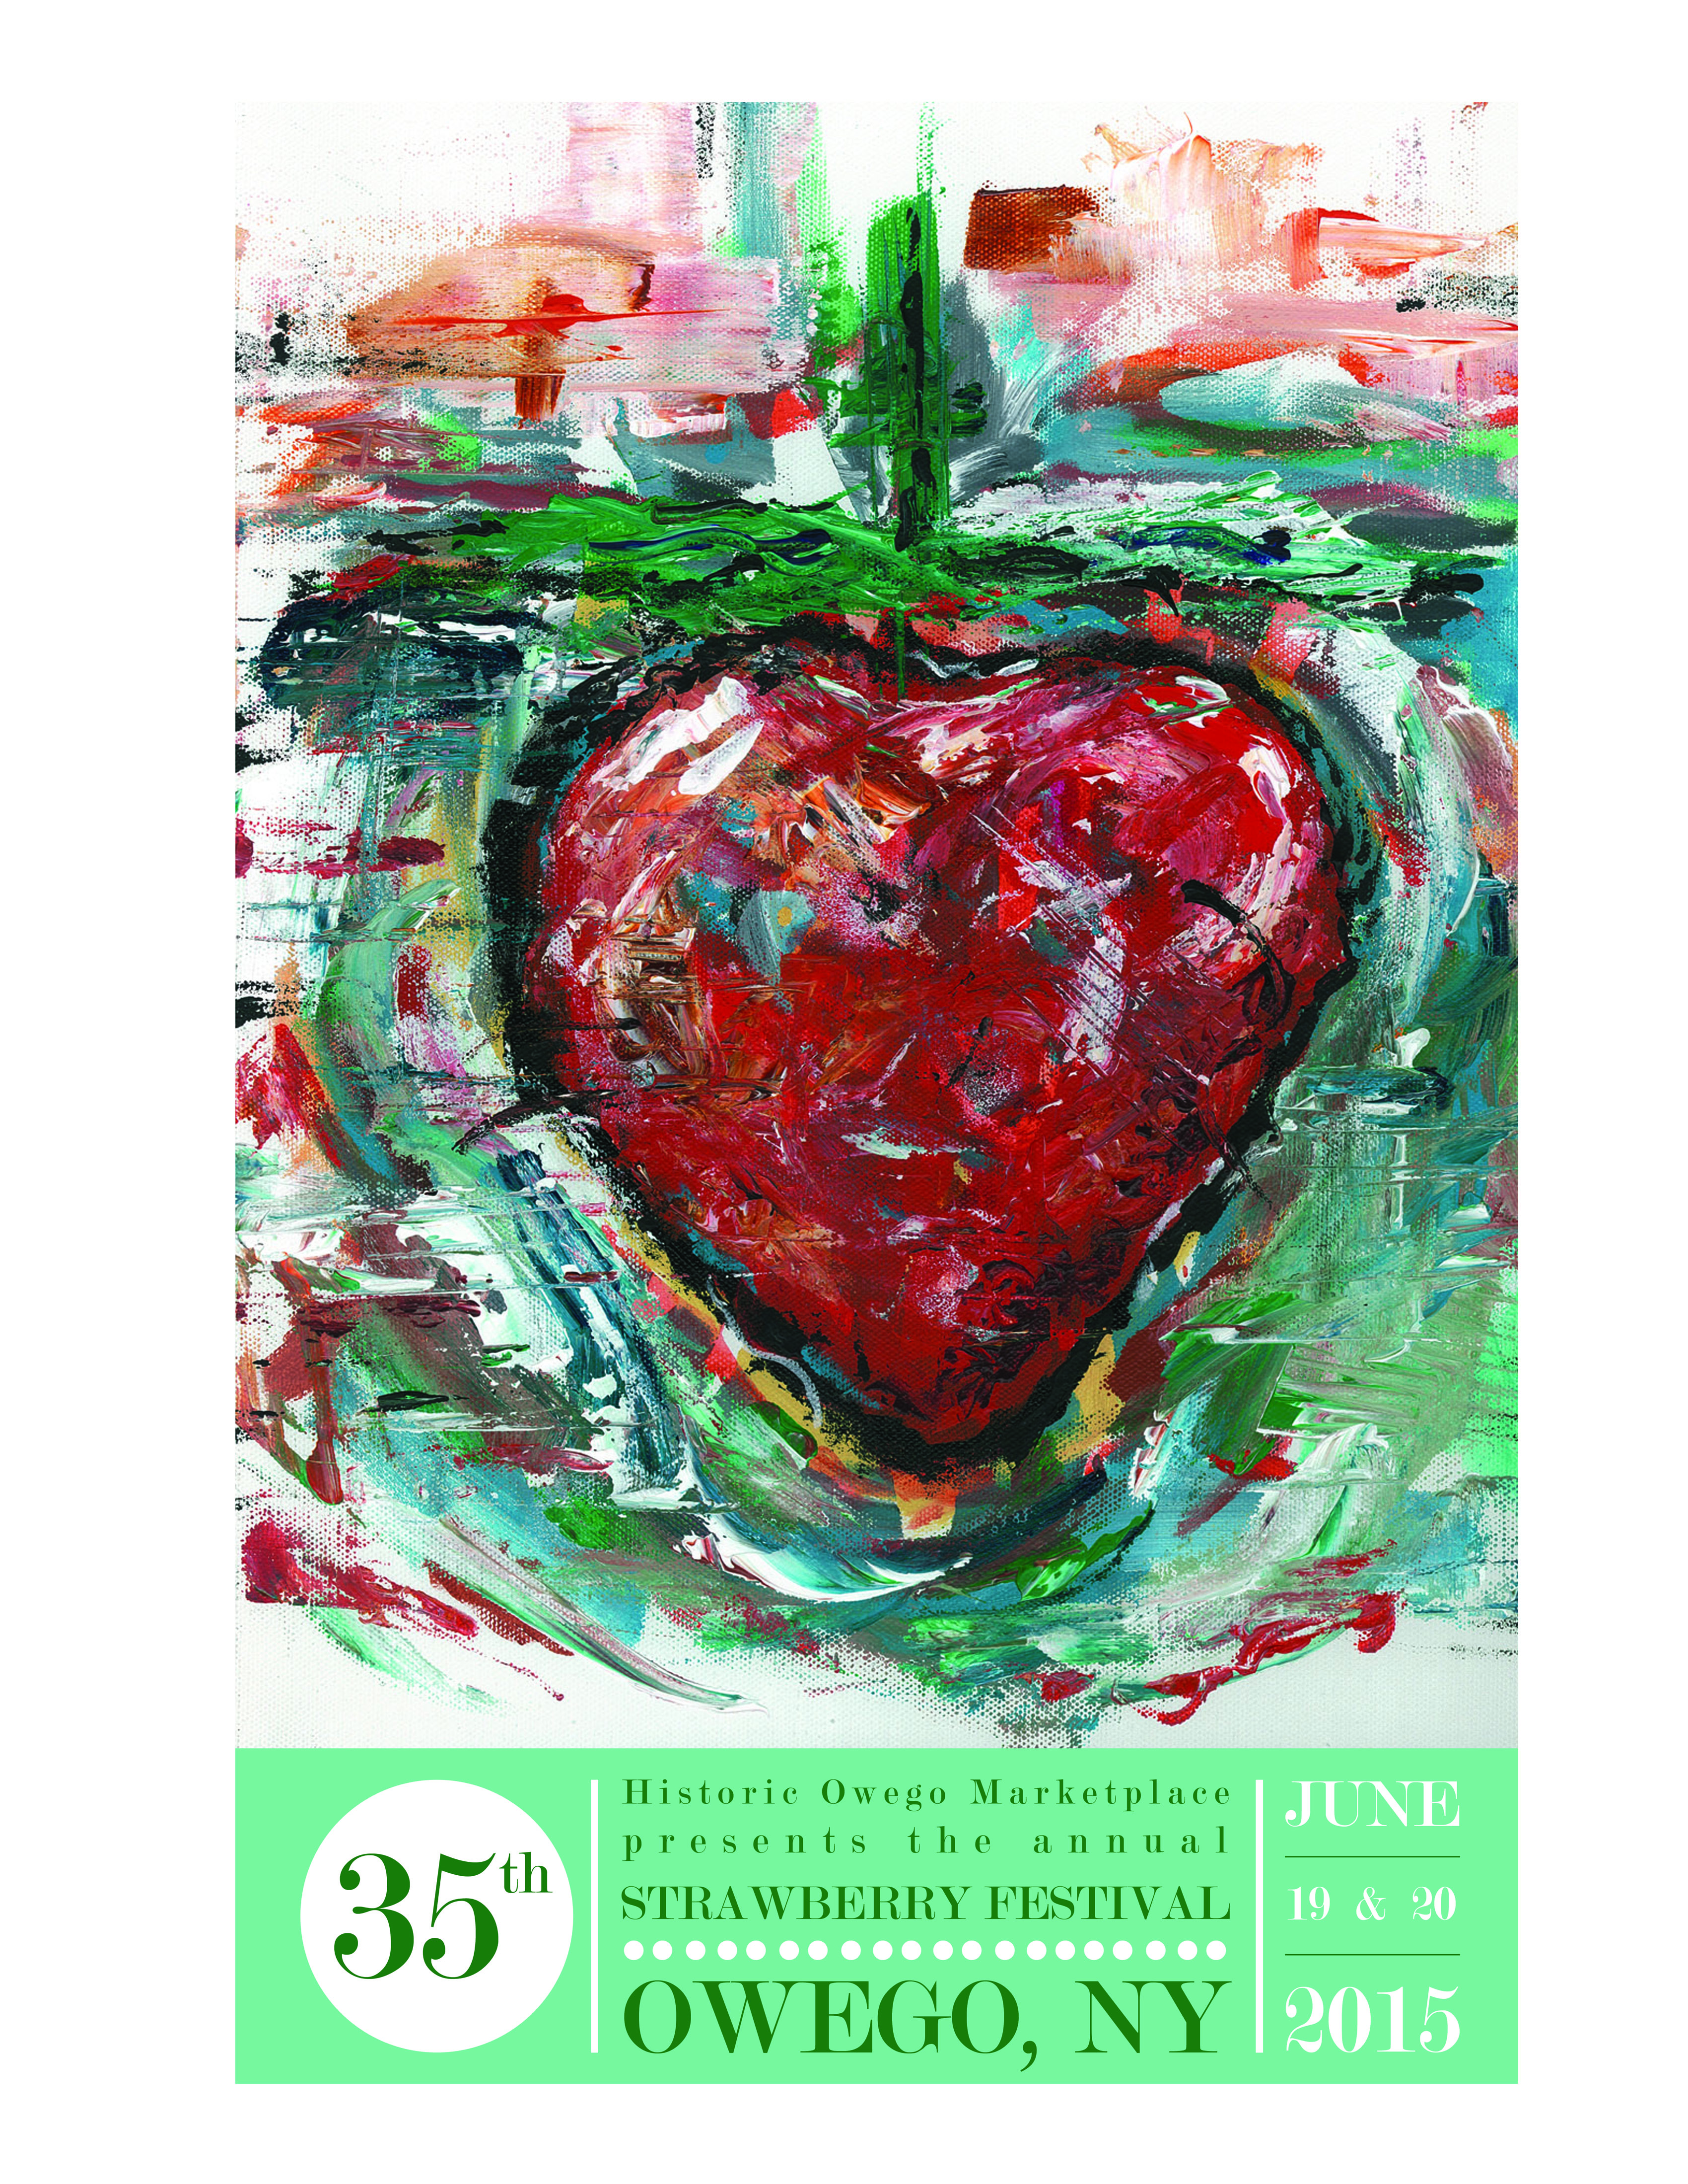 The Husted’s carry on tradition; design commemorative Strawberry Festival poster